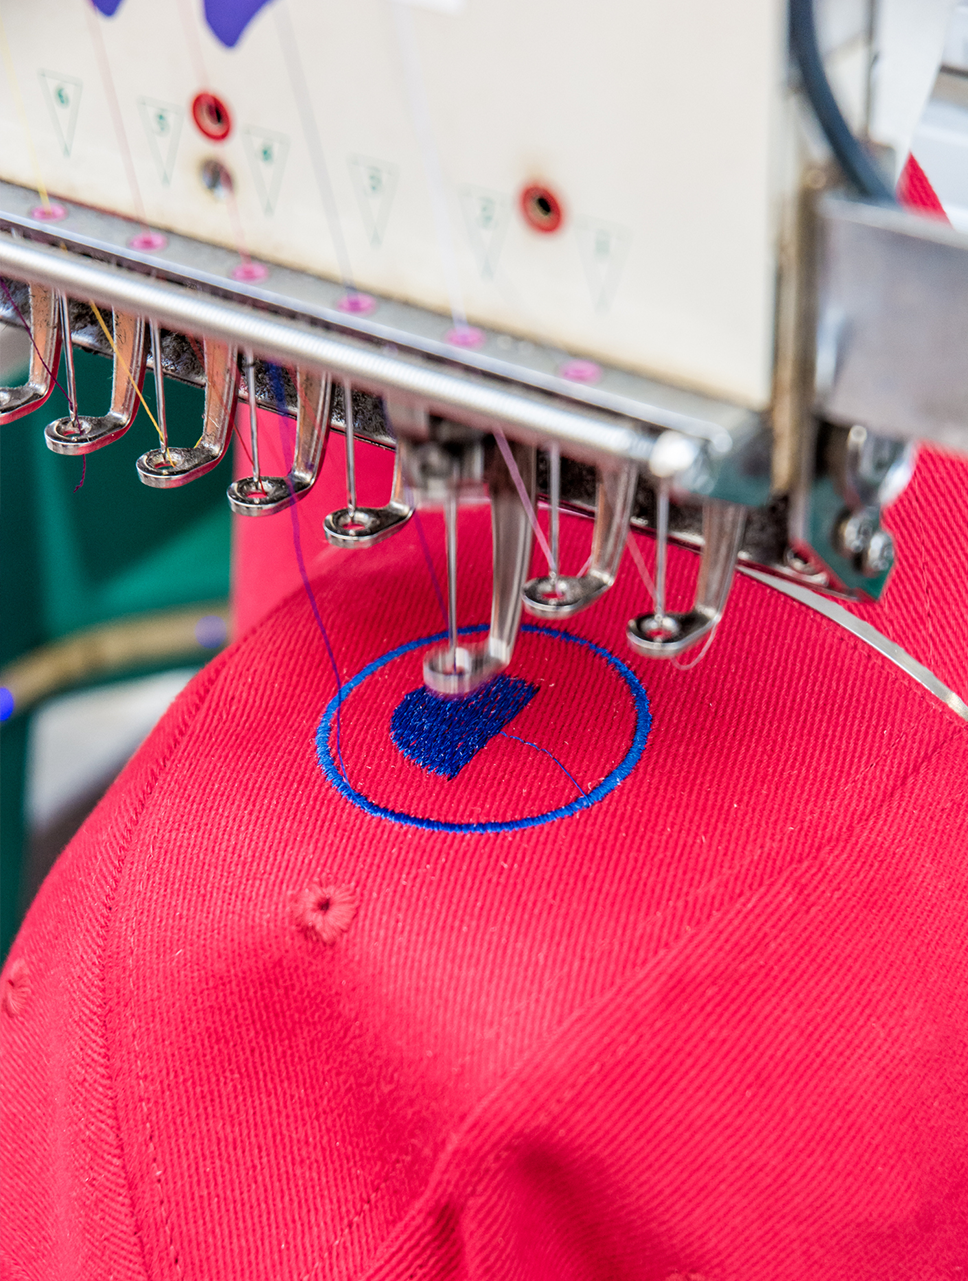 Monogram embroidery — Hats in South Holland, IL